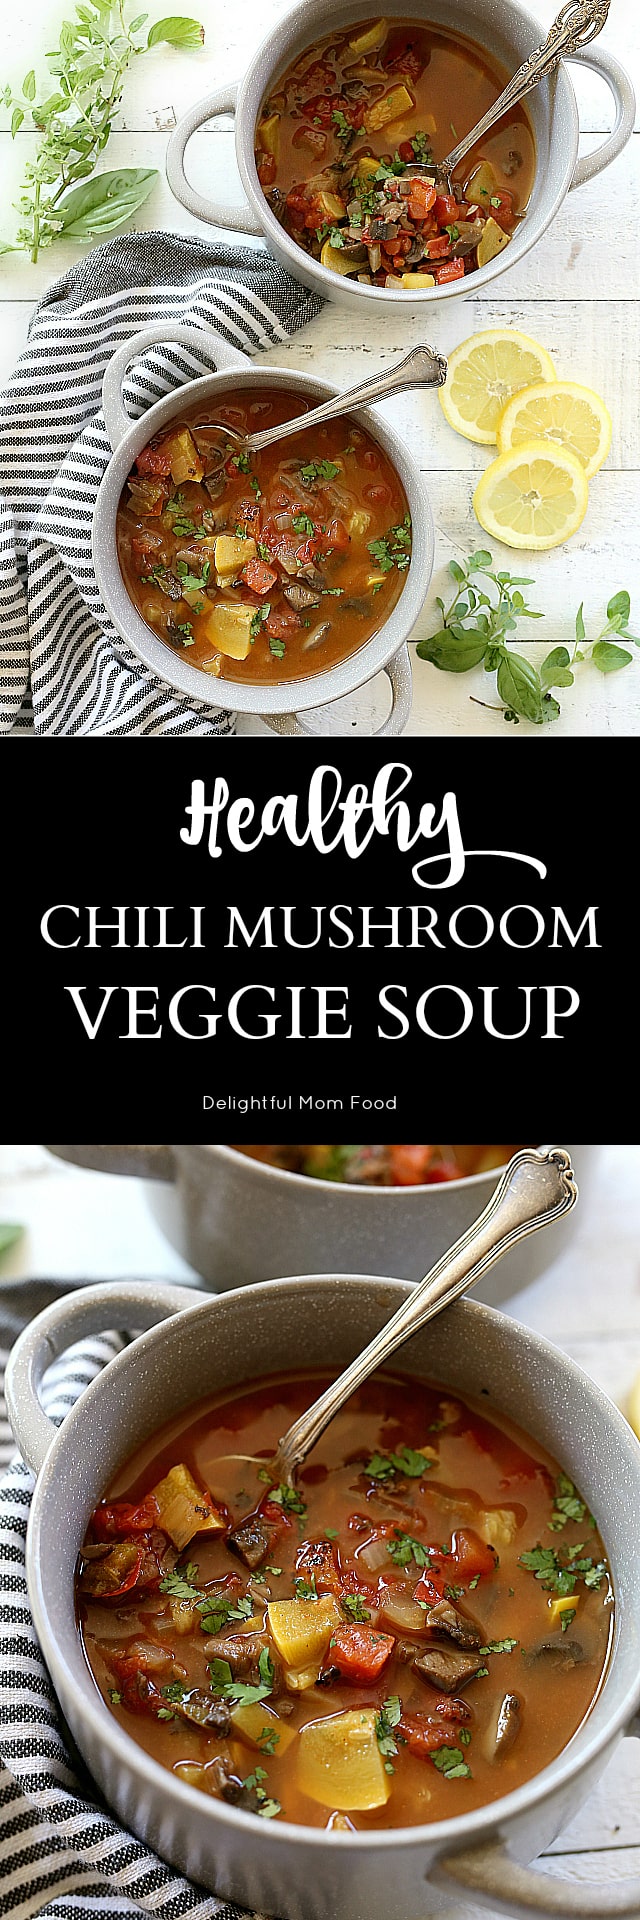 Mushroom vegetable soup packed with flavorful green chili, zucchini and sweet robust tomatoes made easily in one pot! Kid approved and you can control how much chili spices you want to add! Paleo | Whole 30 | Gluten Free